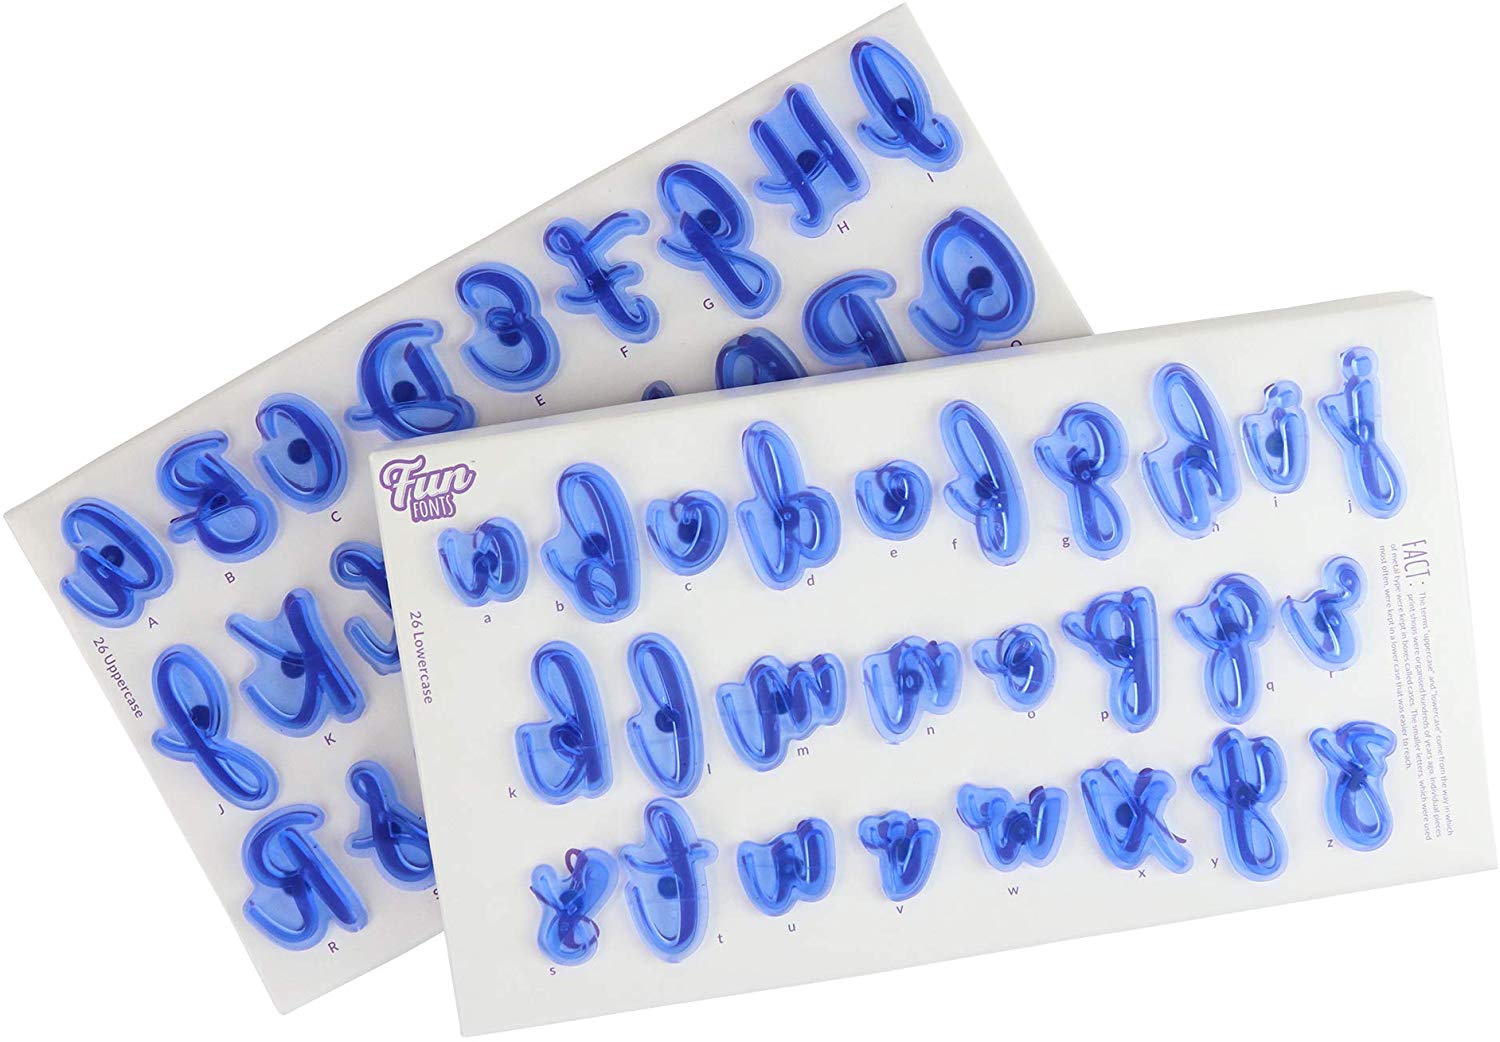 PME Alphabet Upper and Lower Case Fun Fonts, Letter Stamping Set PME Impression Tool - Bake Supply Plus